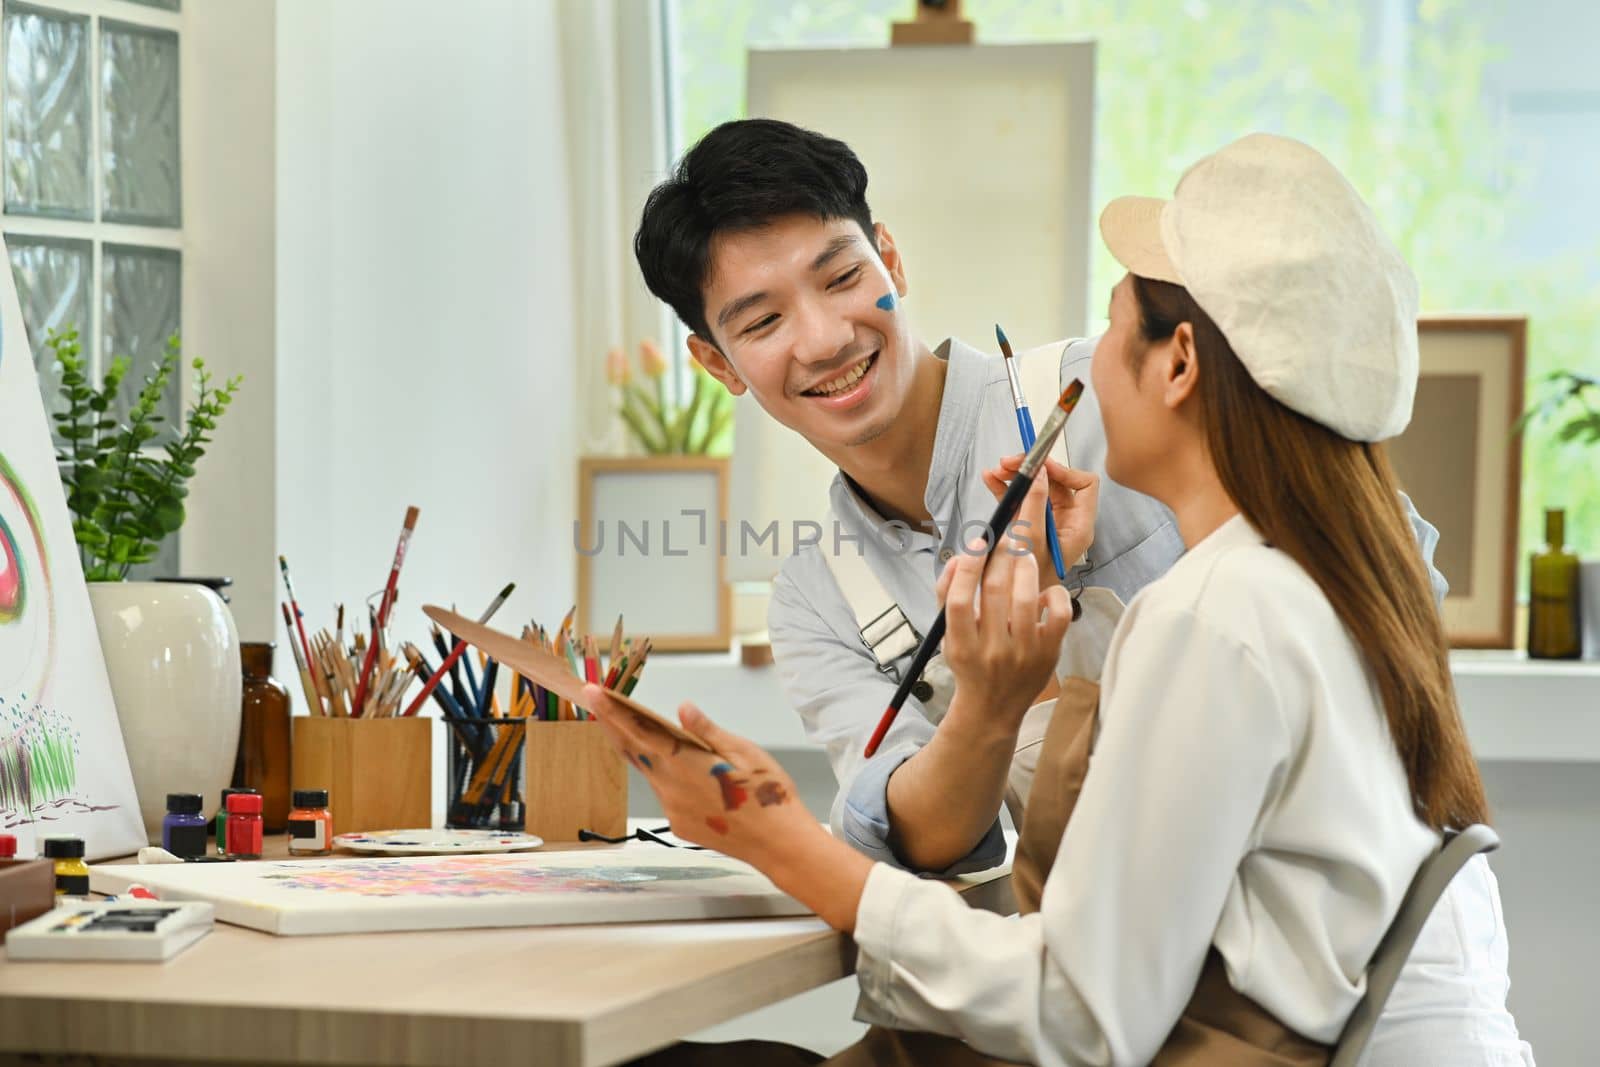 Asian man painting face his girlfriend during painting in at art studio. Leisure activity, creative hobby and art concept.